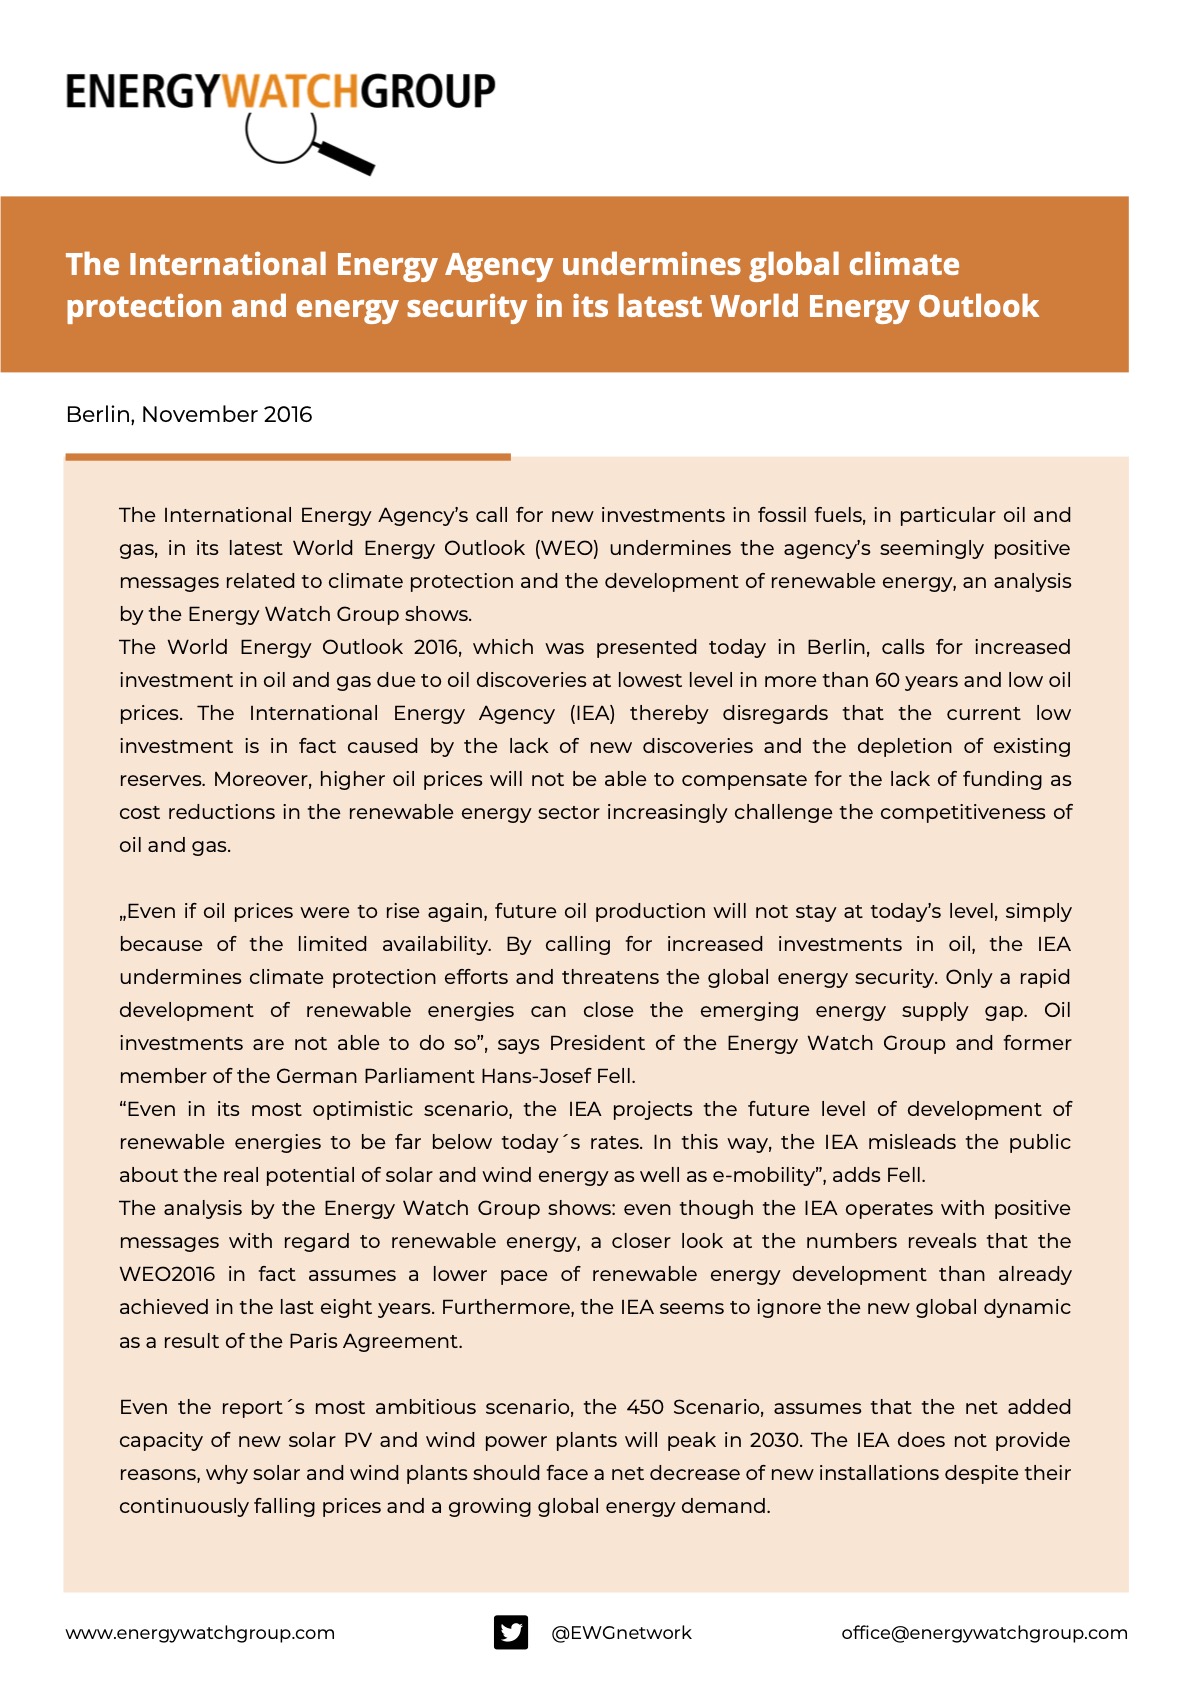 The International Energy Agency undermines global climate protection and energy security in its latest World Energy Outlook Kopie